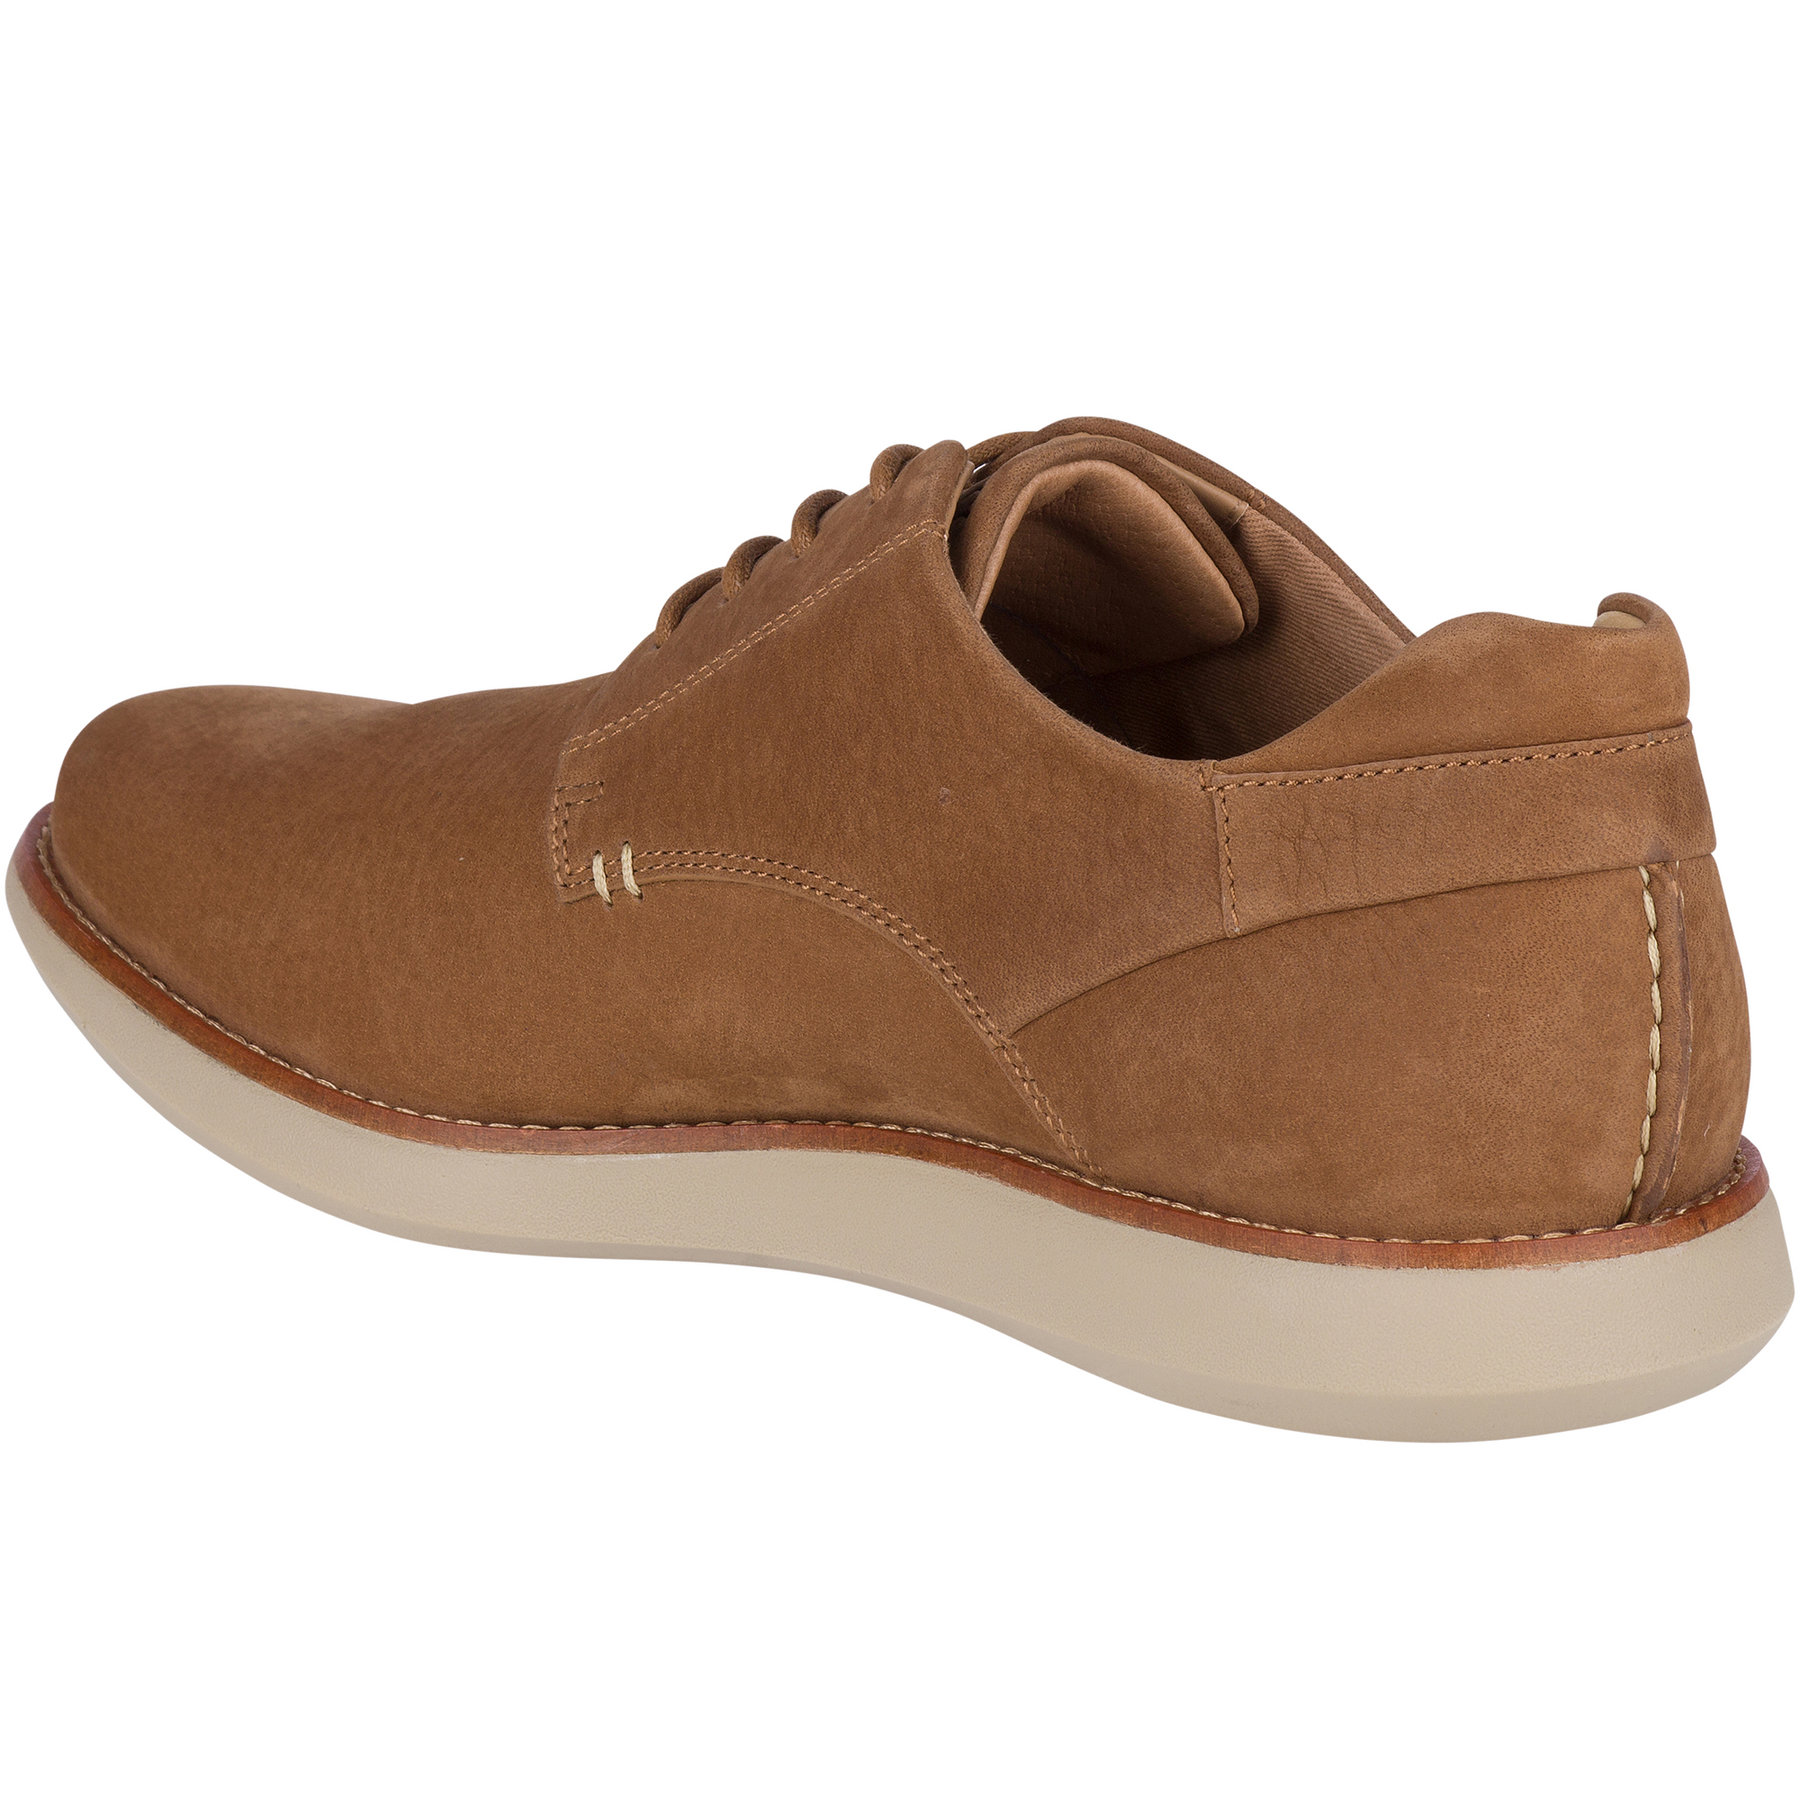 Men's Kennedy Oxford Brown Casual (STS18898)